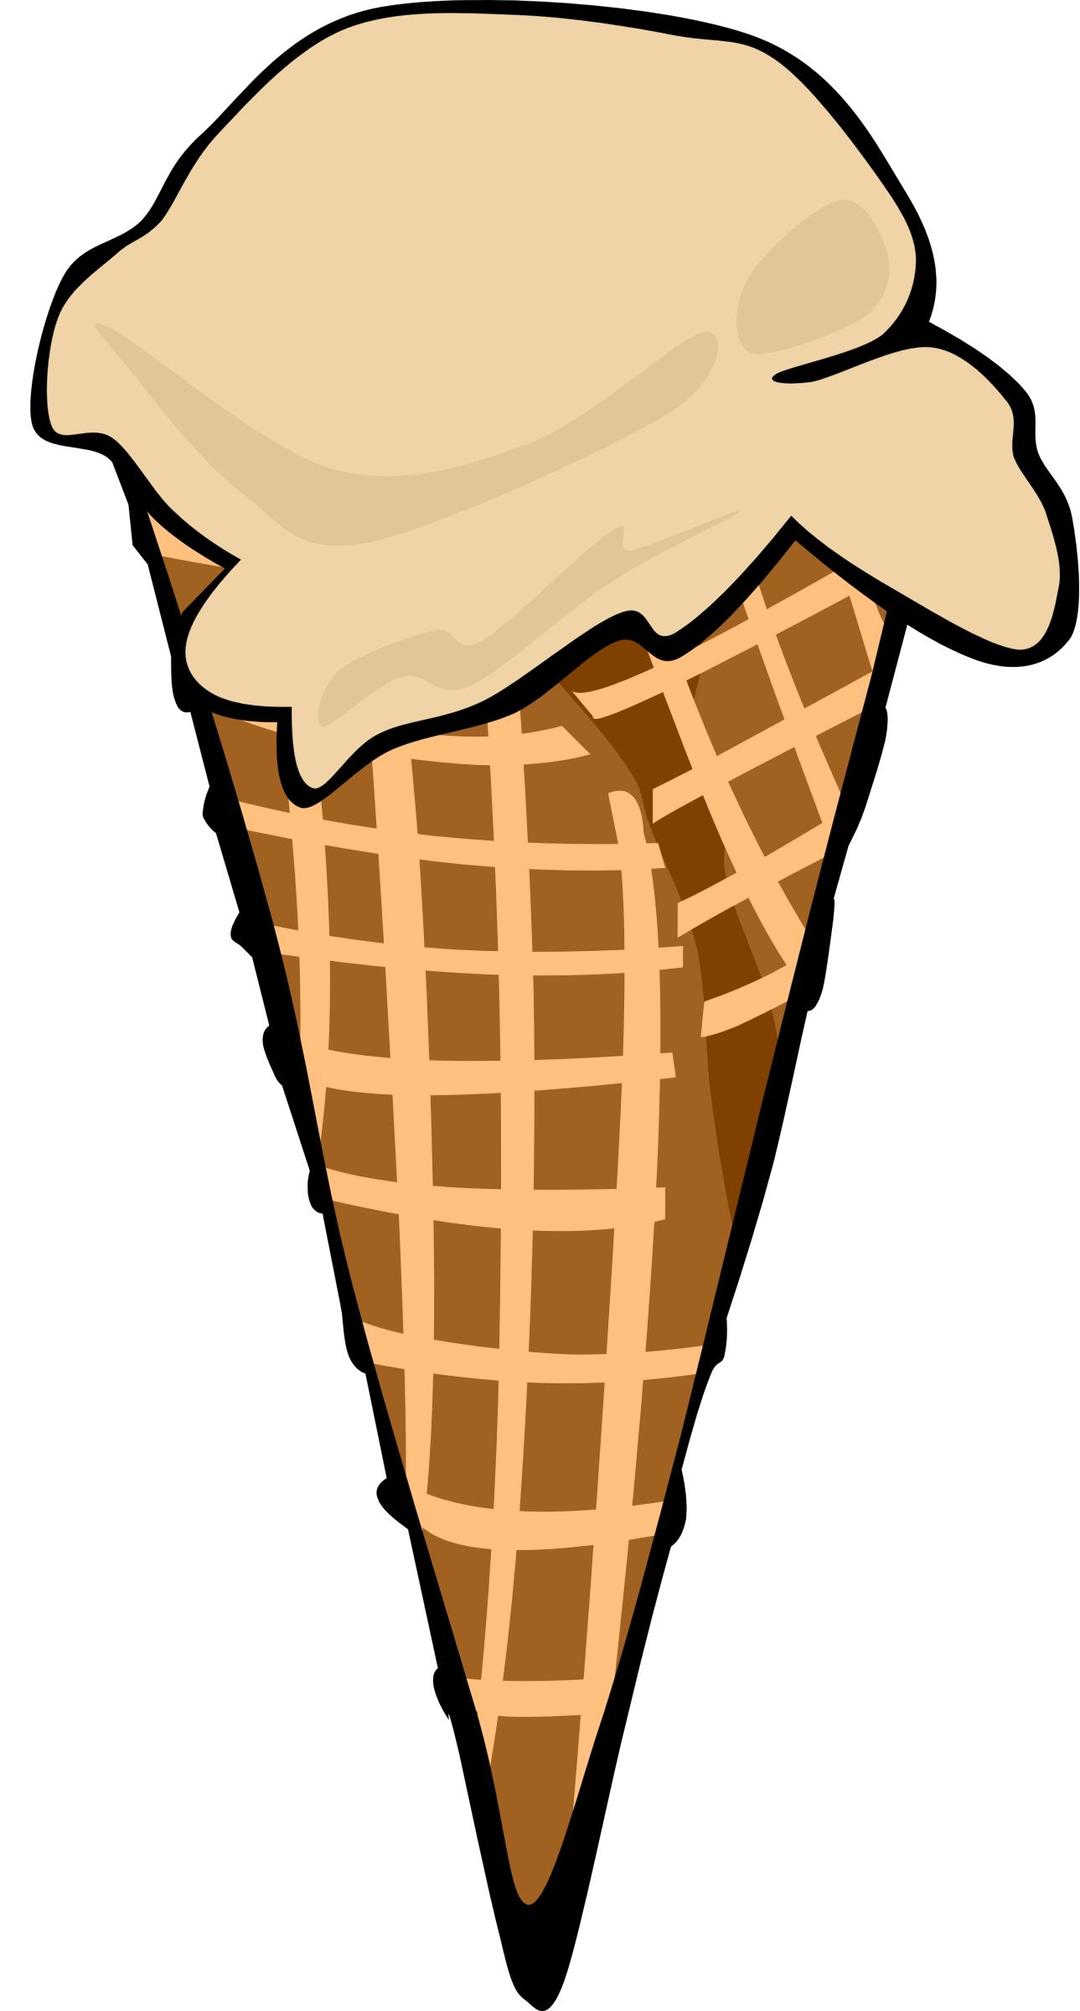 Fast Food, Desserts, Ice Cream Cones, Waffle, Single png transparent